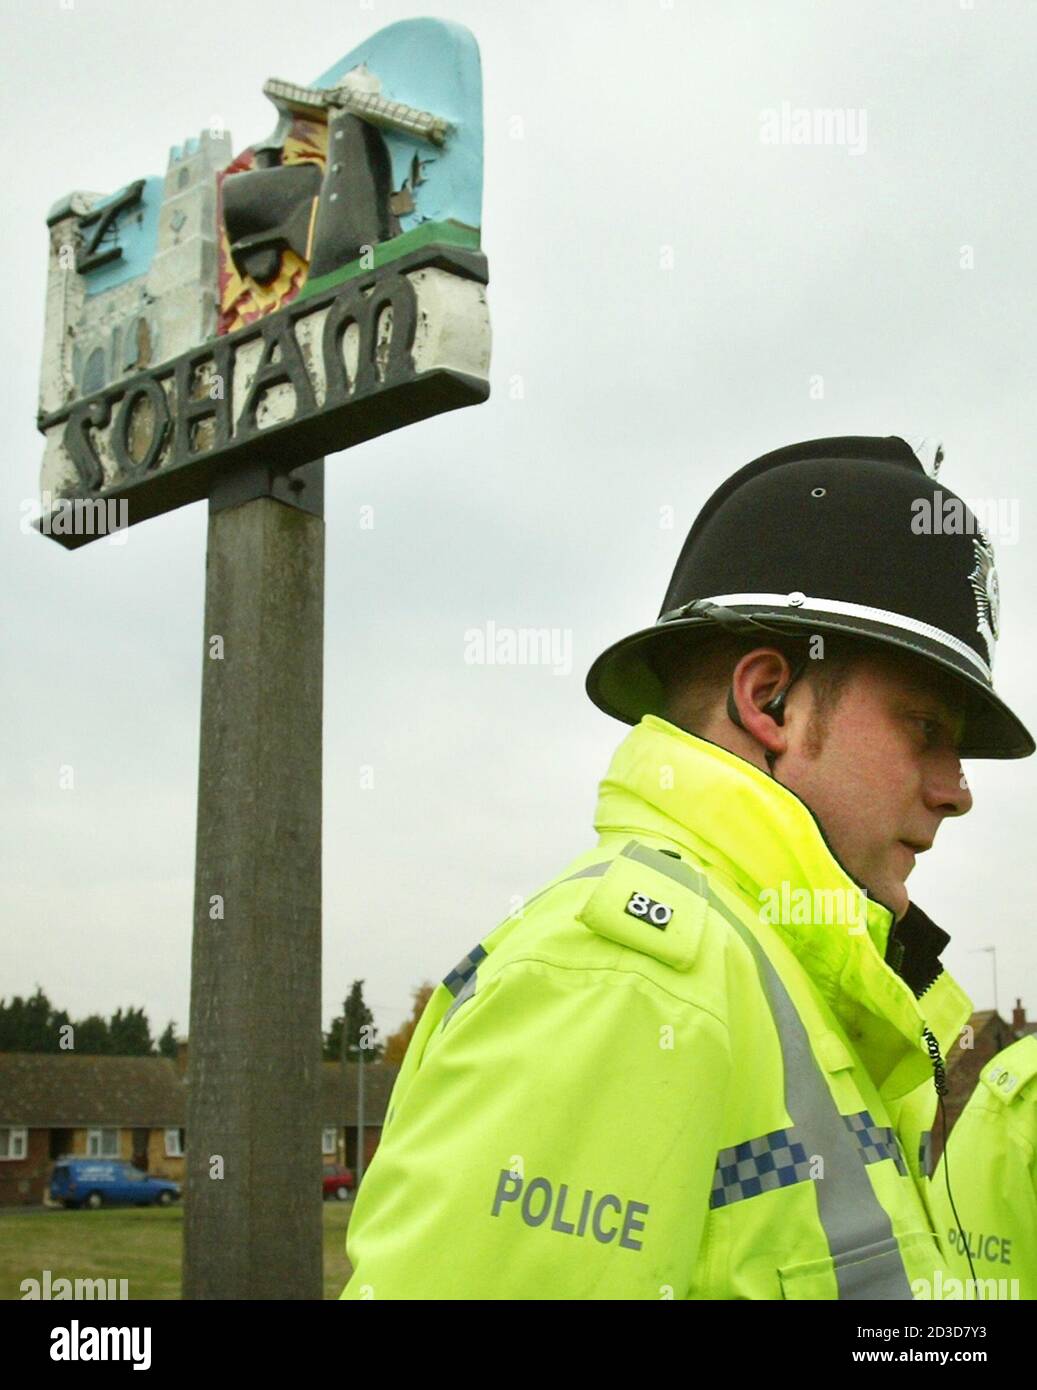 A policeman stands guard as the coach containing the jurors in the Soham murder trial is escorted by police into the Cambridgeshire town of Soham, November 10, 2003. The jury will be taken to various sites including the house at Number 5 College Close, where Ian Huntley lived and prosecutors say he murdered schoolgirls Holly Wells and Jessica Chapman last August. REUTERS/Peter Macdiarmid  JB Stock Photo